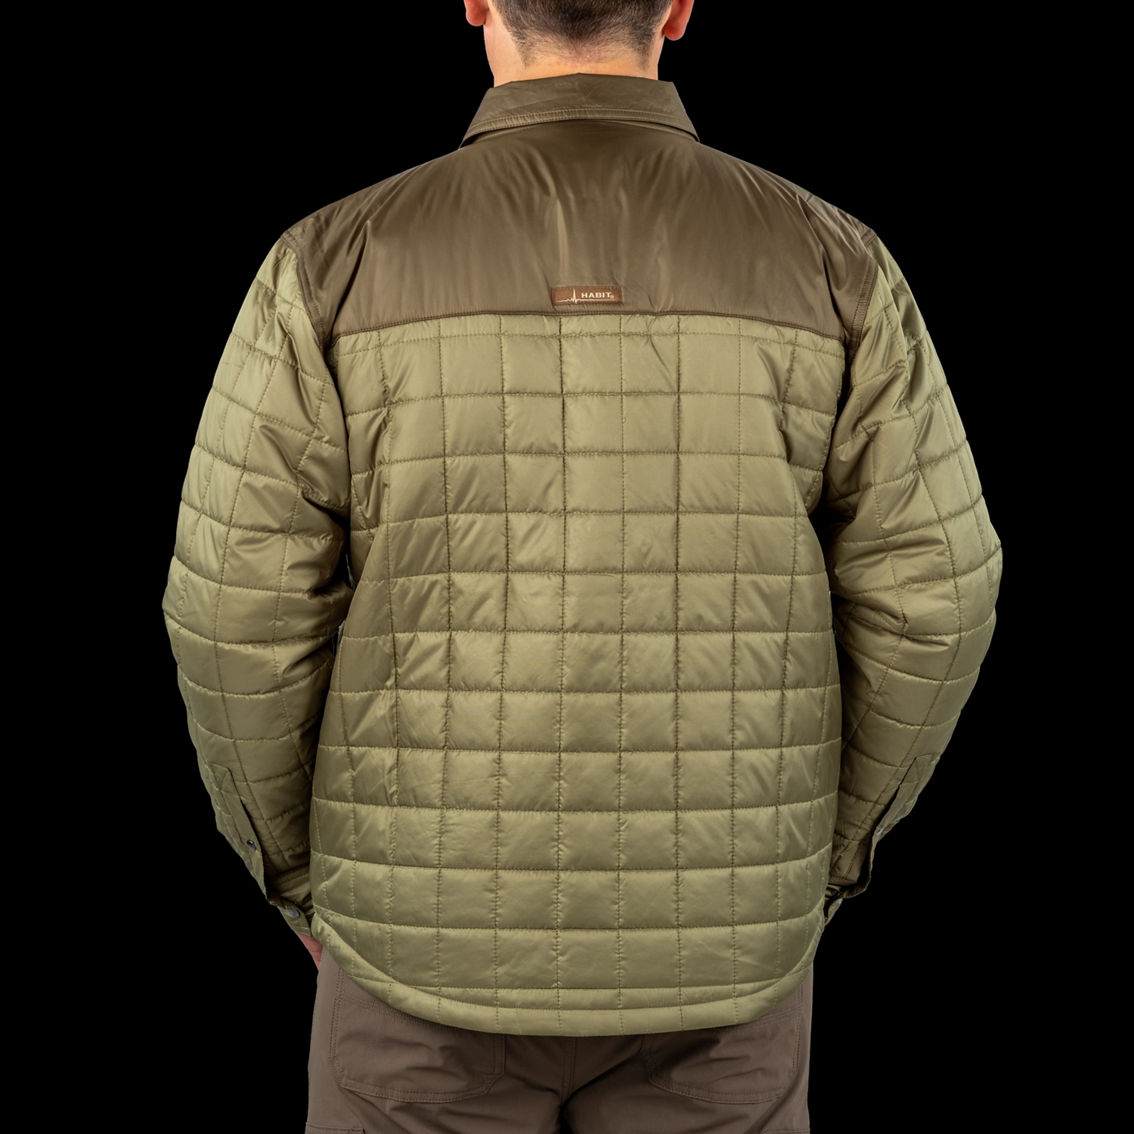 Habit Men's Quilted Shirtjacket - Image 4 of 5